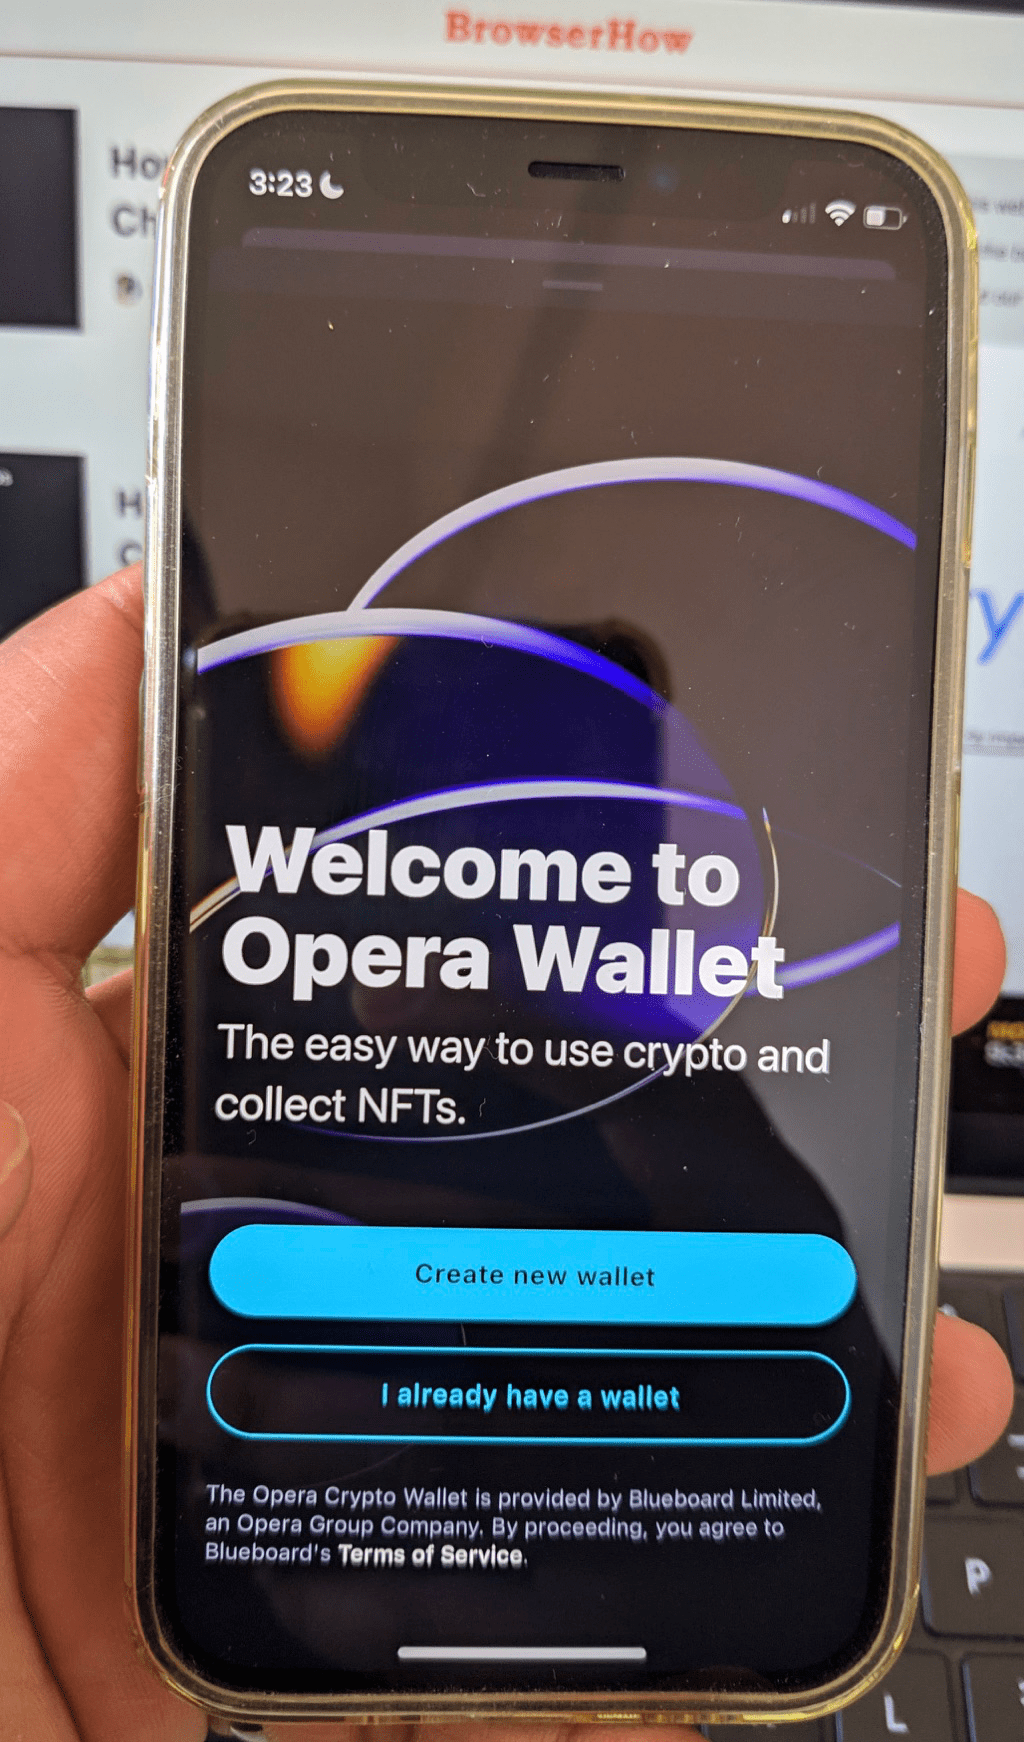 Welcome to Crypto Wallet screen on Opera iPhone